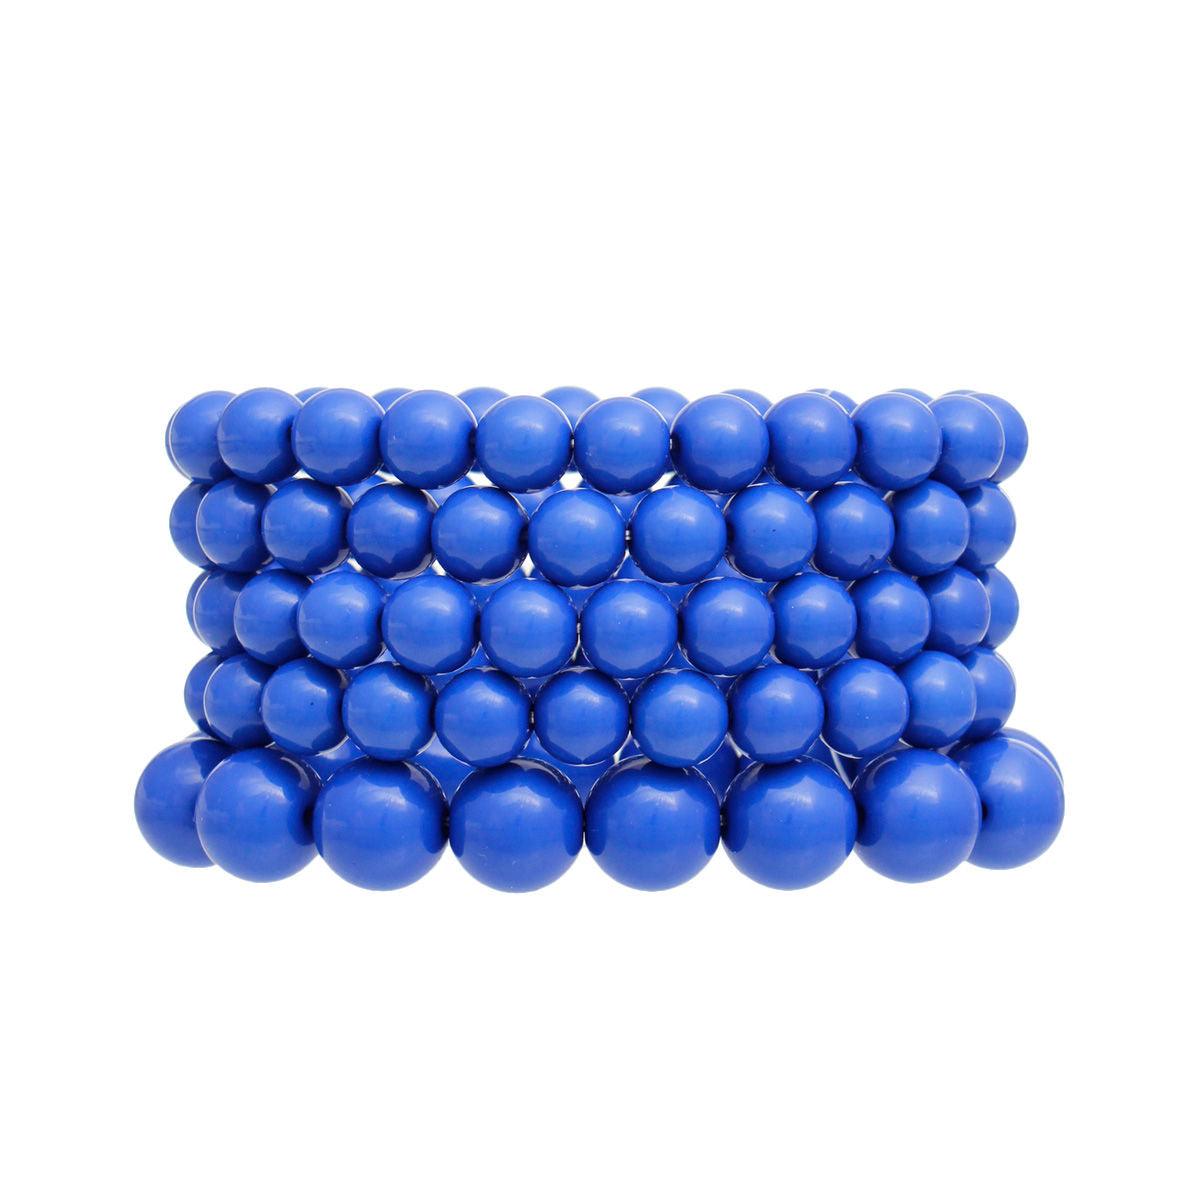 Stylish Matte Blue Bead Bracelets to Up Your Accessory Game